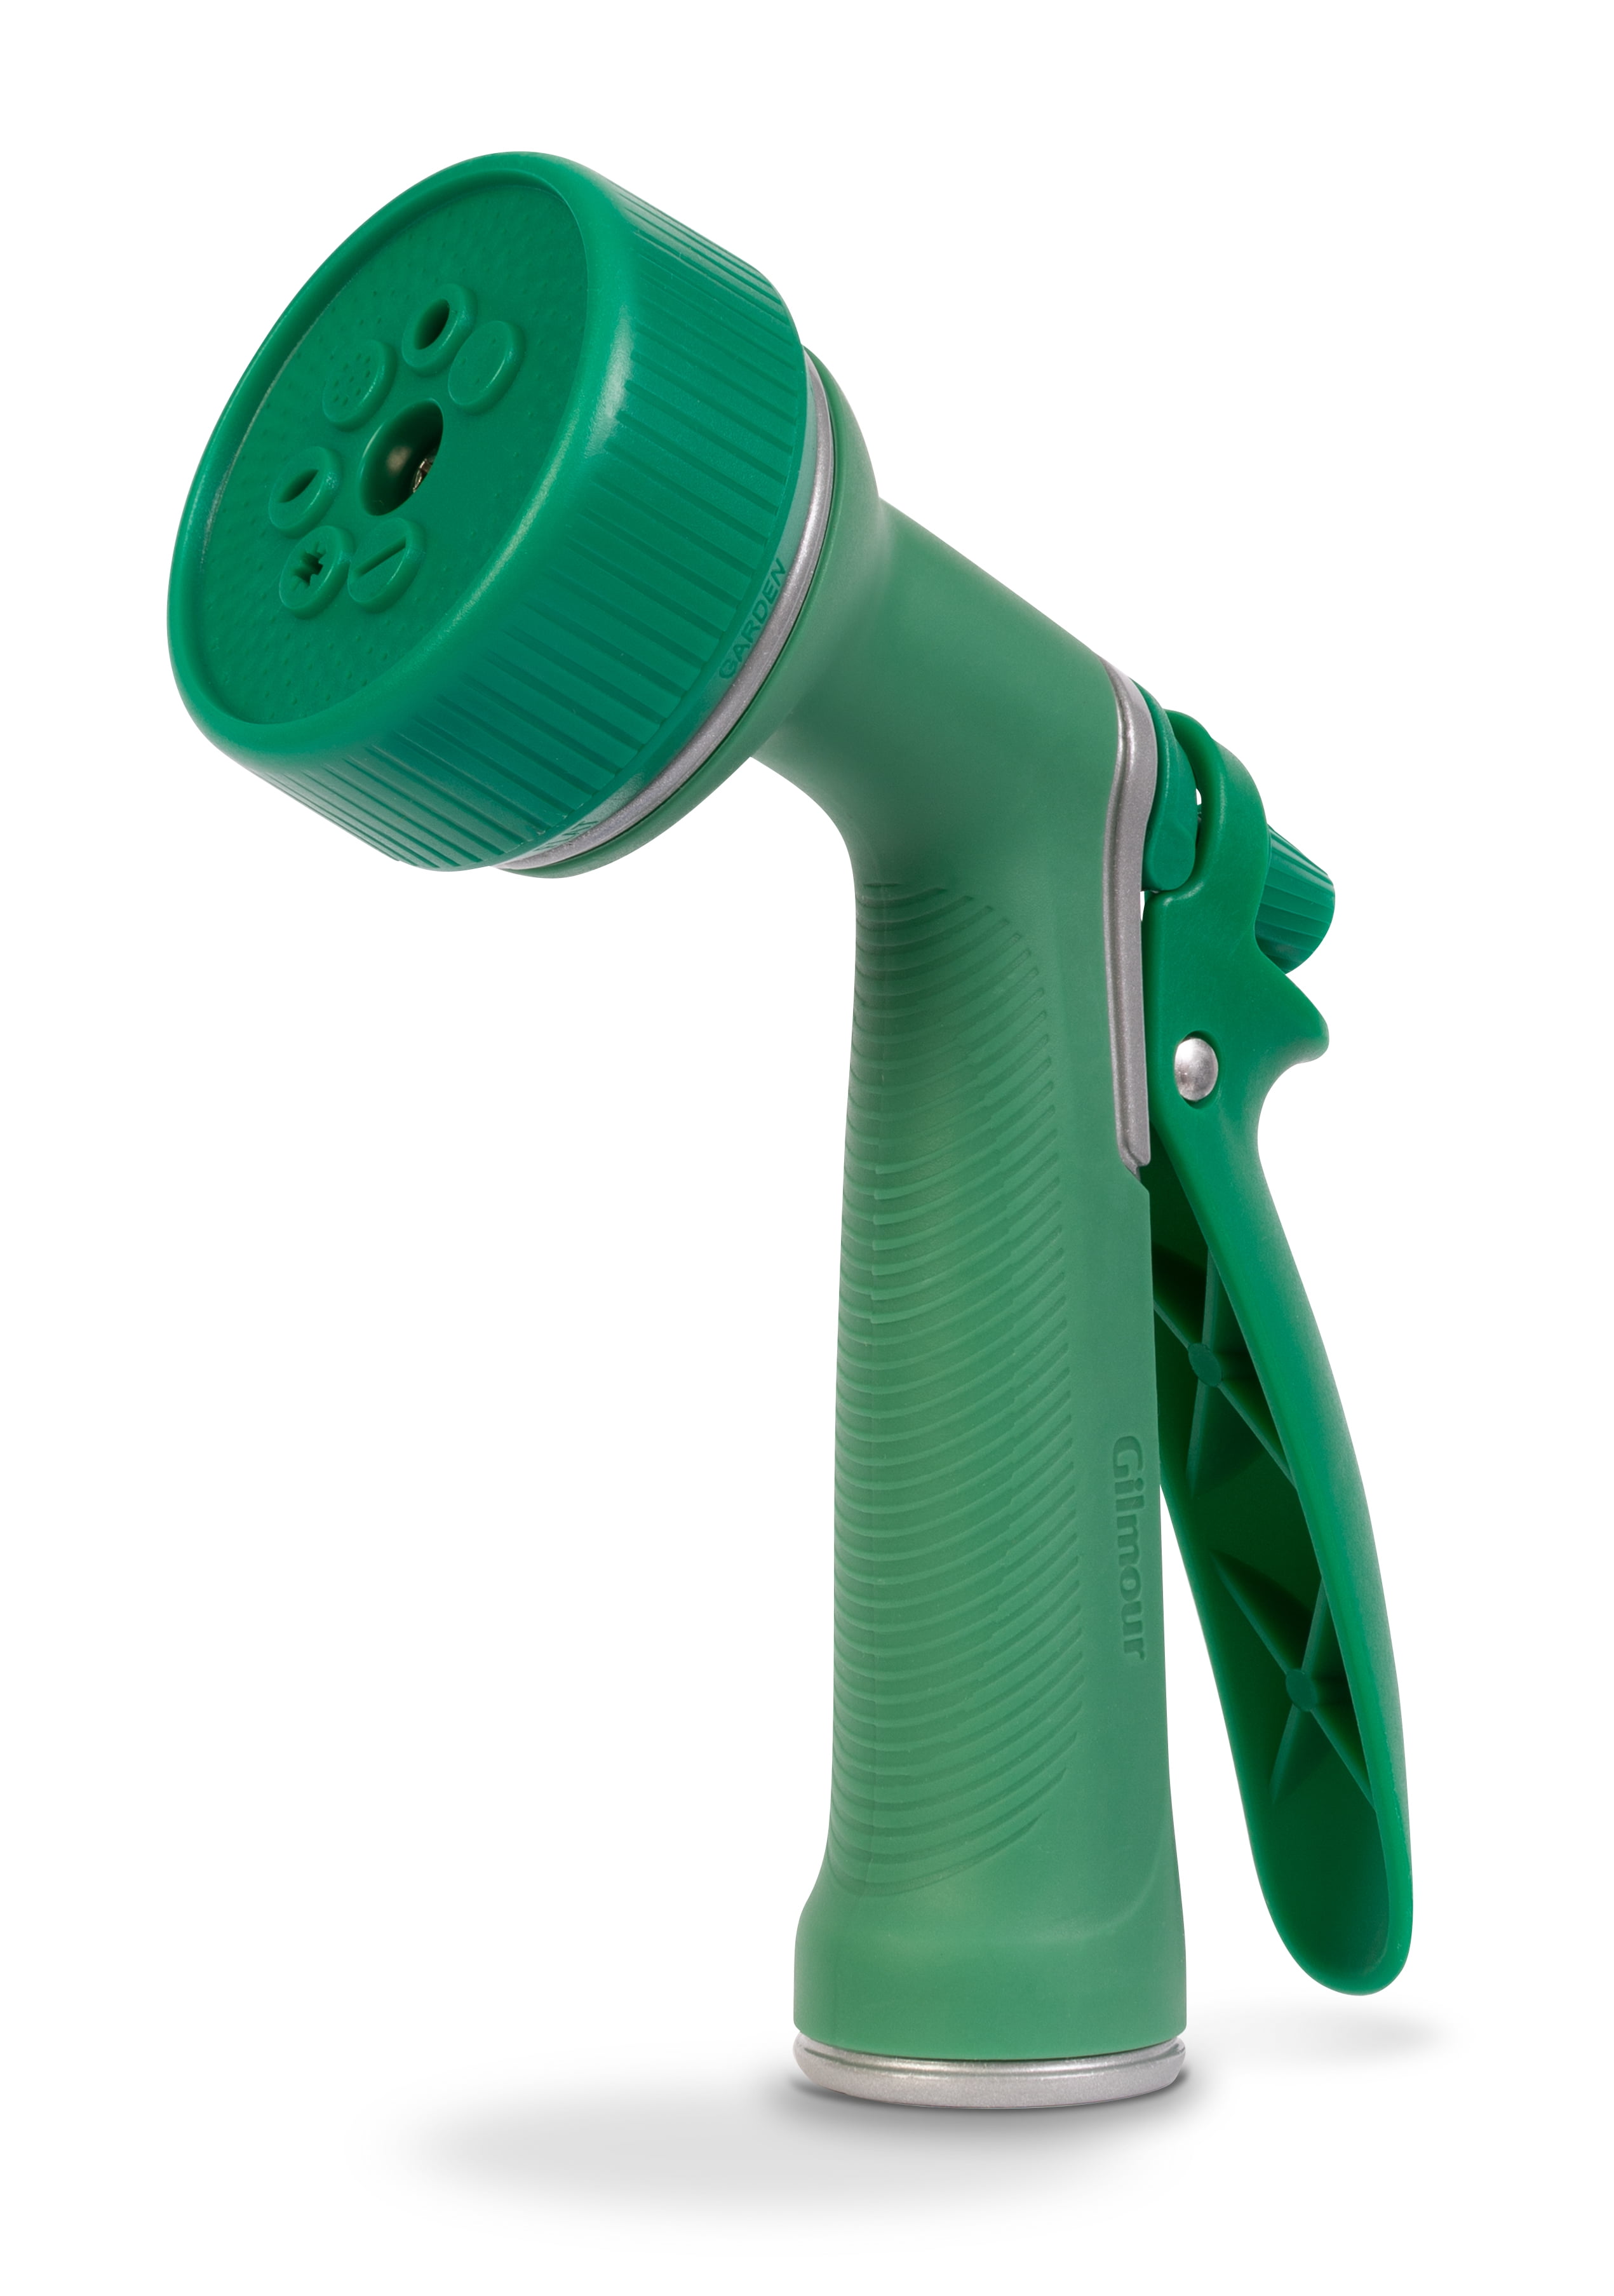 Gilmour Multi Pattern Heavy Duty Thumb Control Slip Resistant Nozzle Sprayer for sale online 